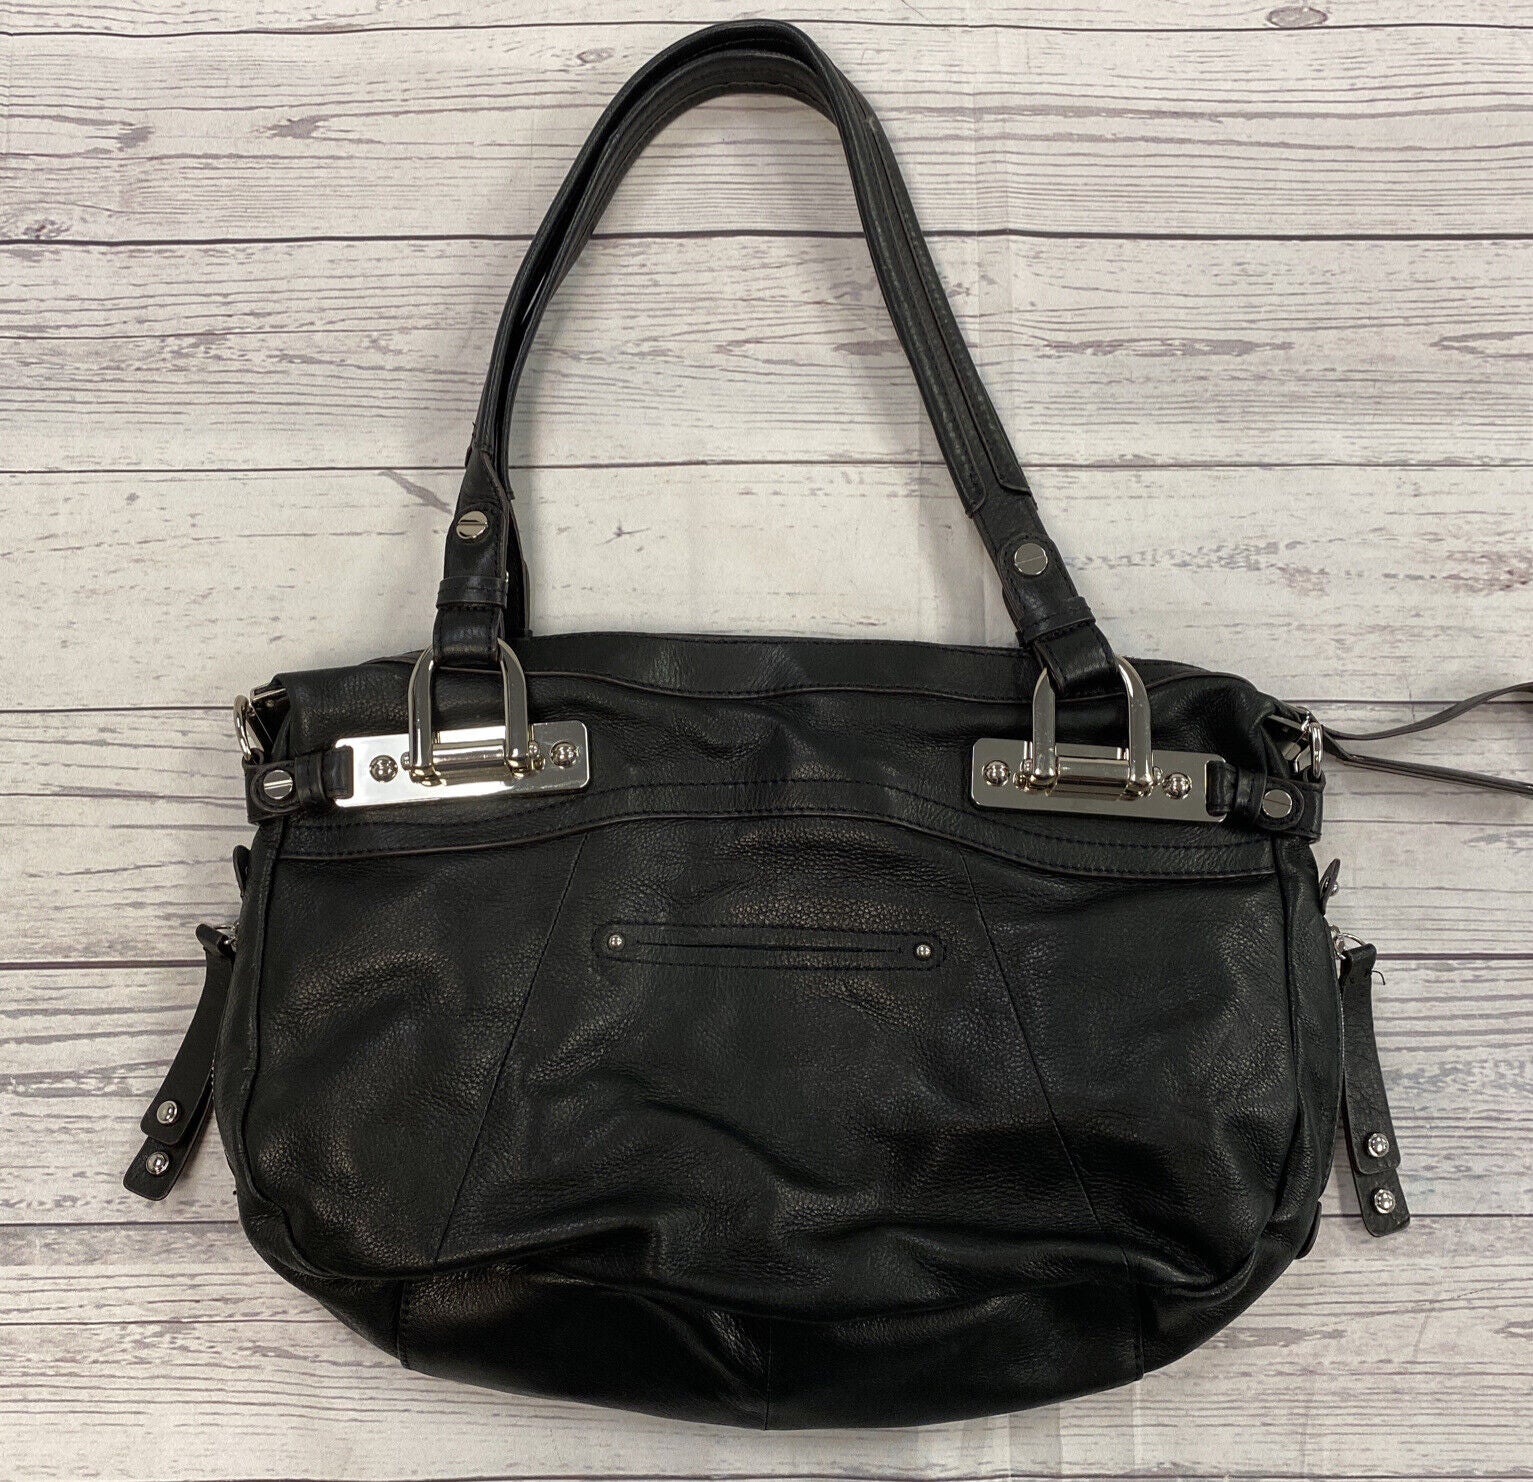 Purse - clothing & accessories - by owner - apparel sale - craigslist